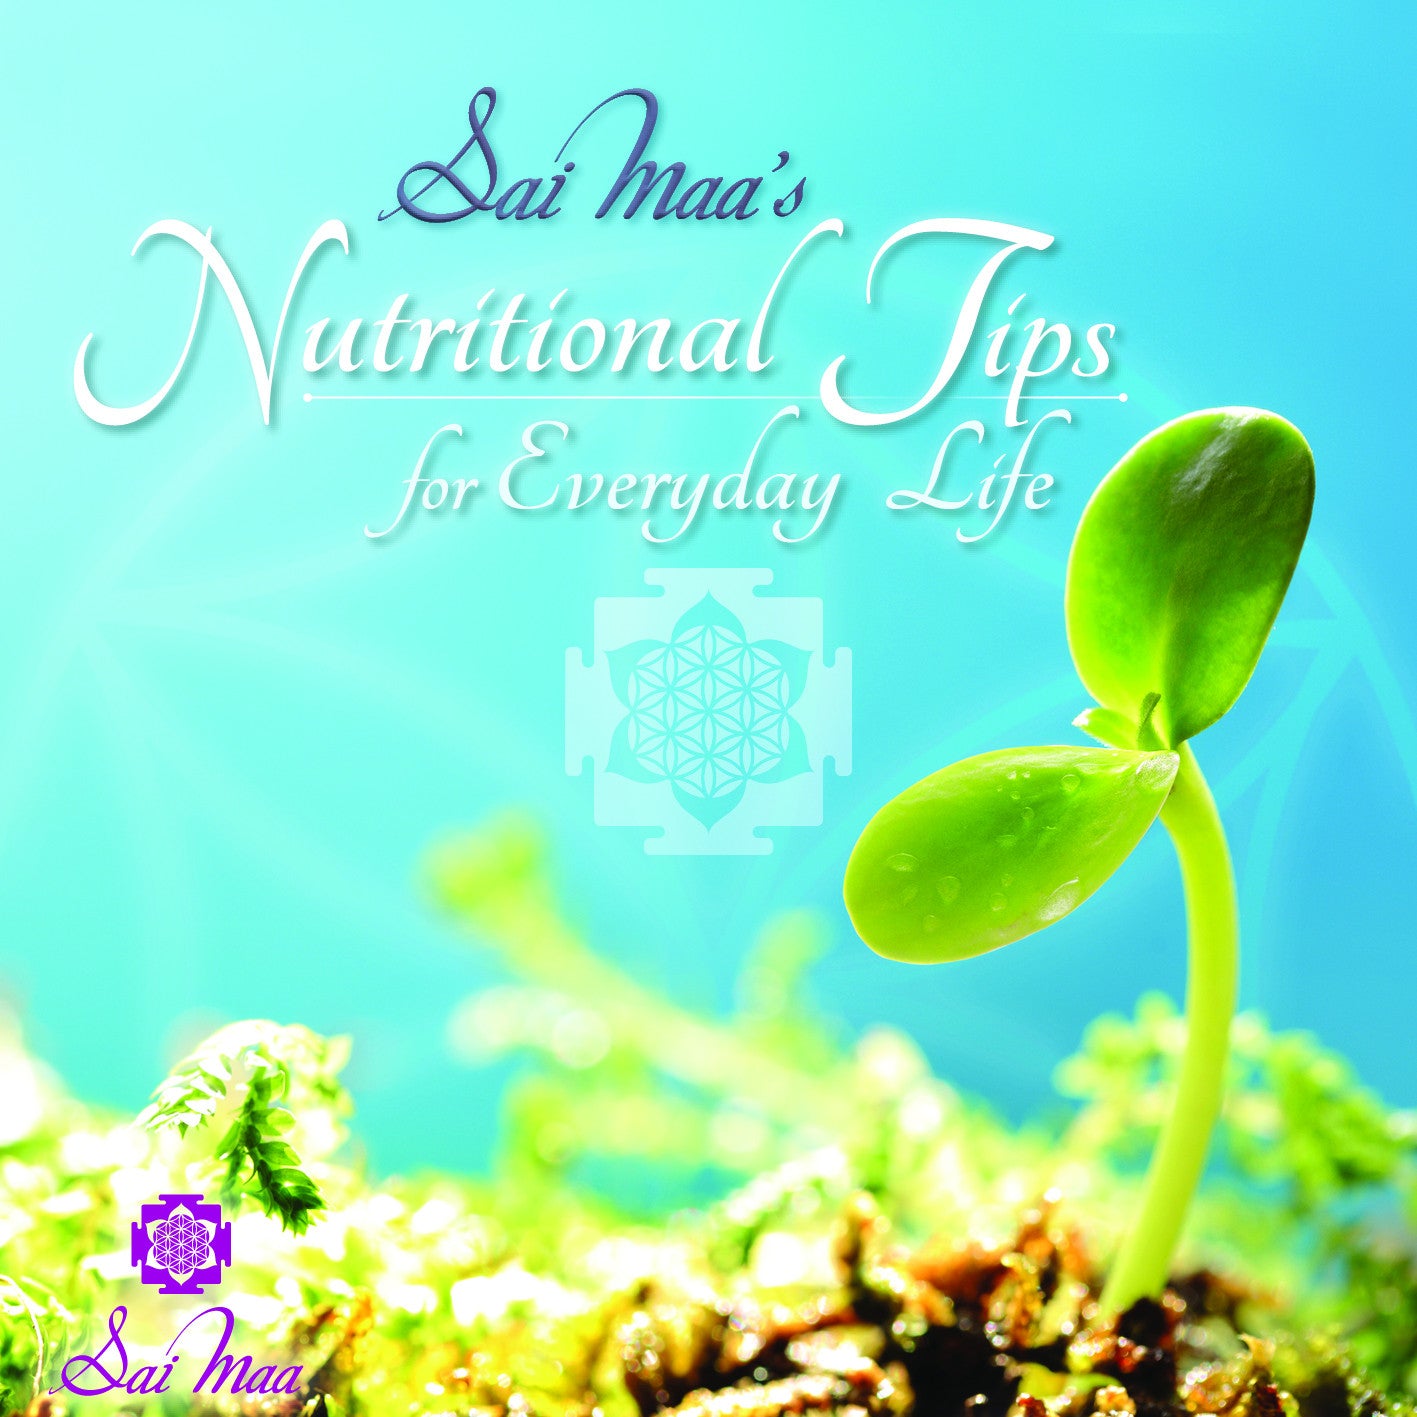 Sai Maa's Nutritional Tips for Everyday Life